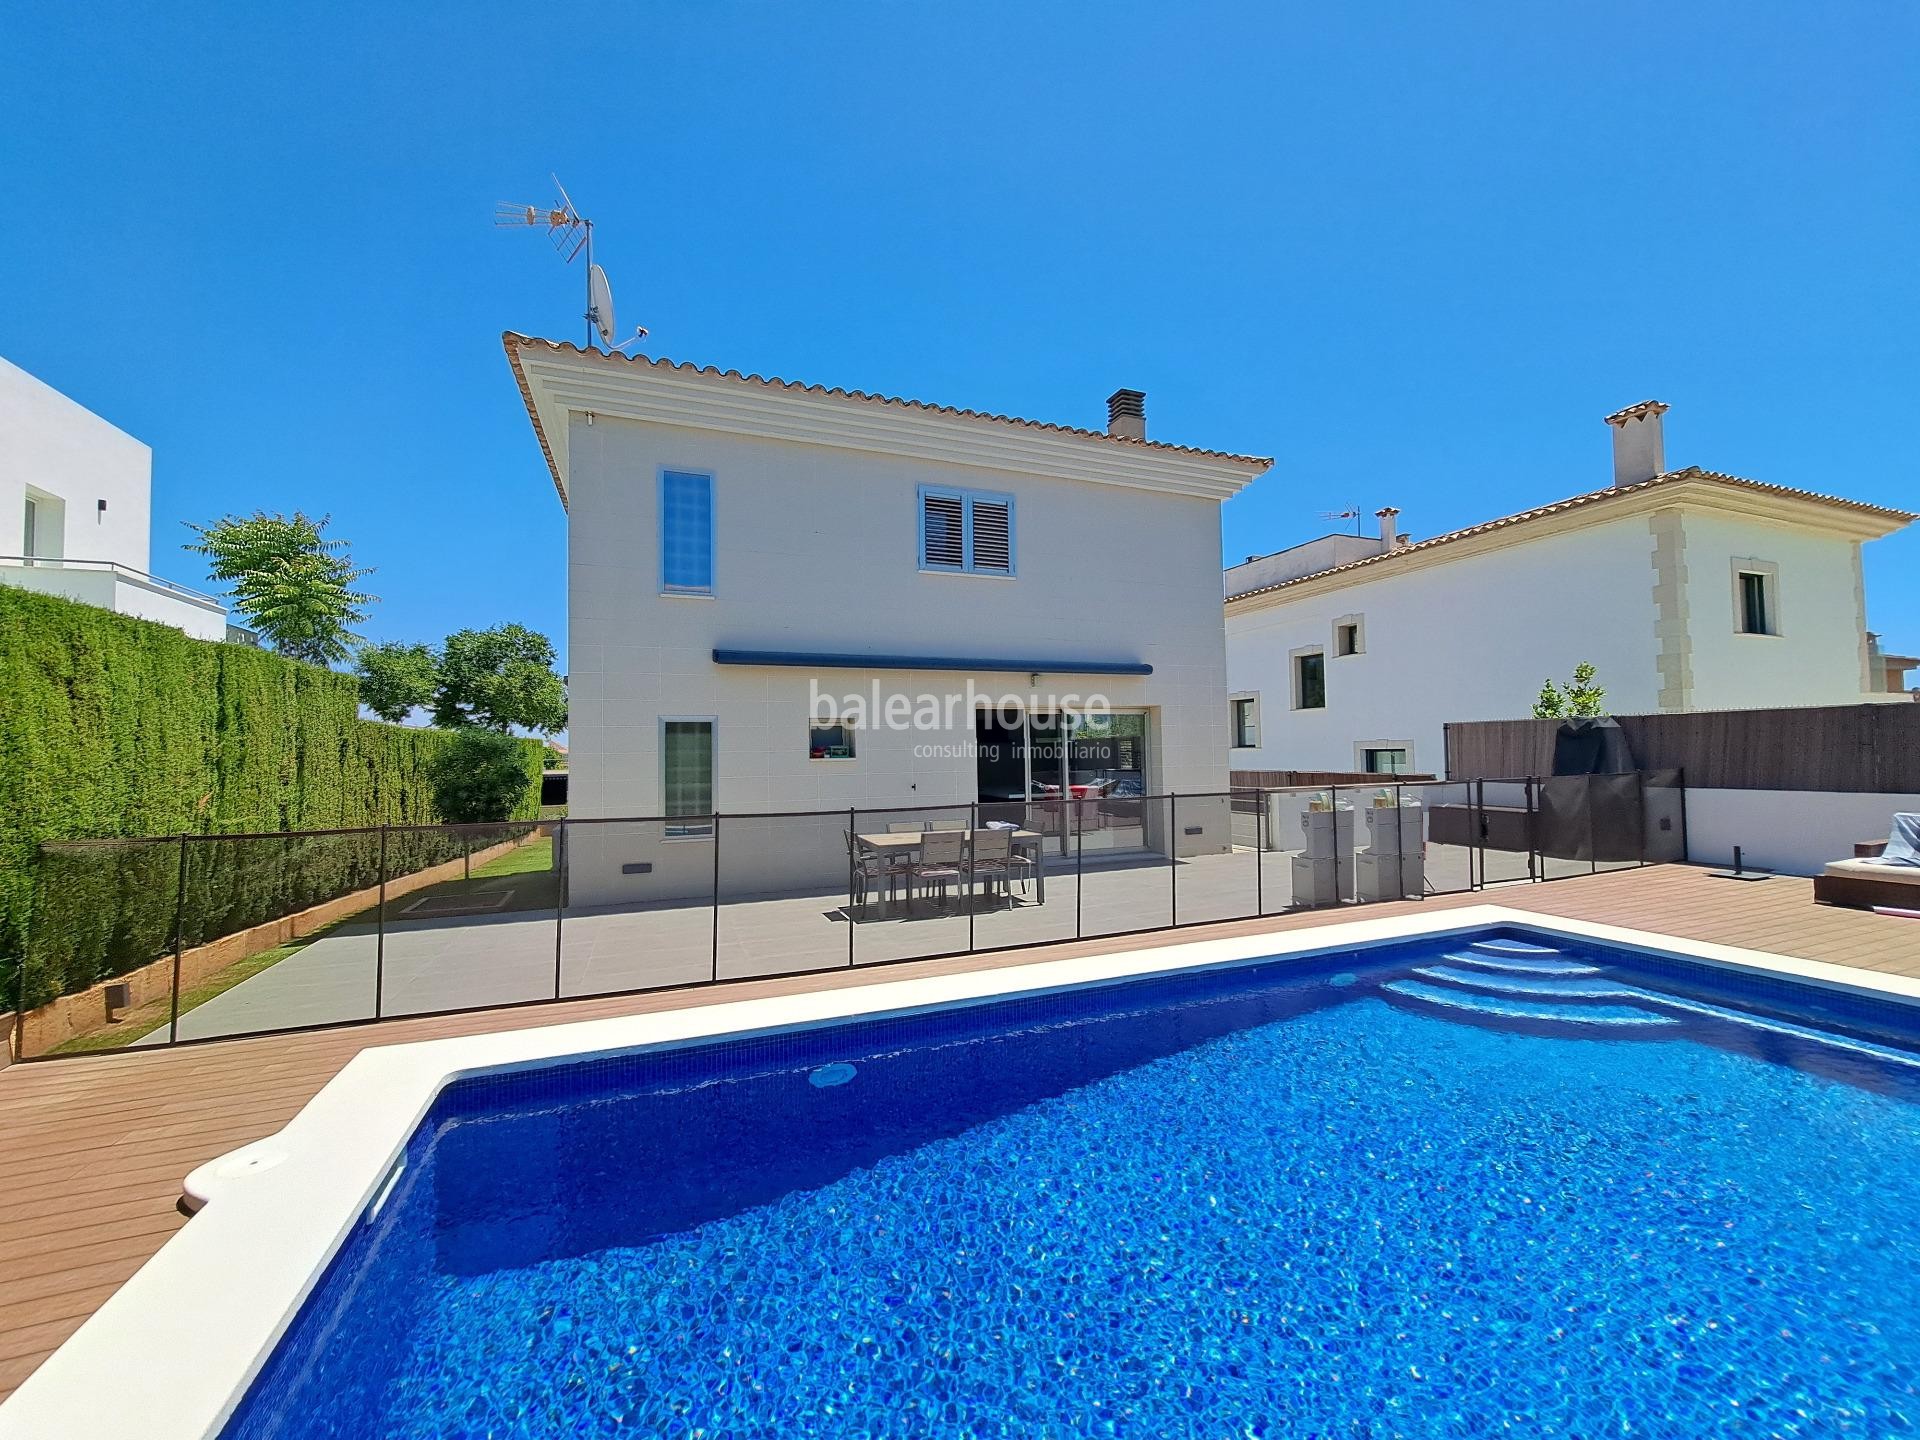 Modern villa with pool in the quiet area of Son Puig, very close to the city centre of Palma